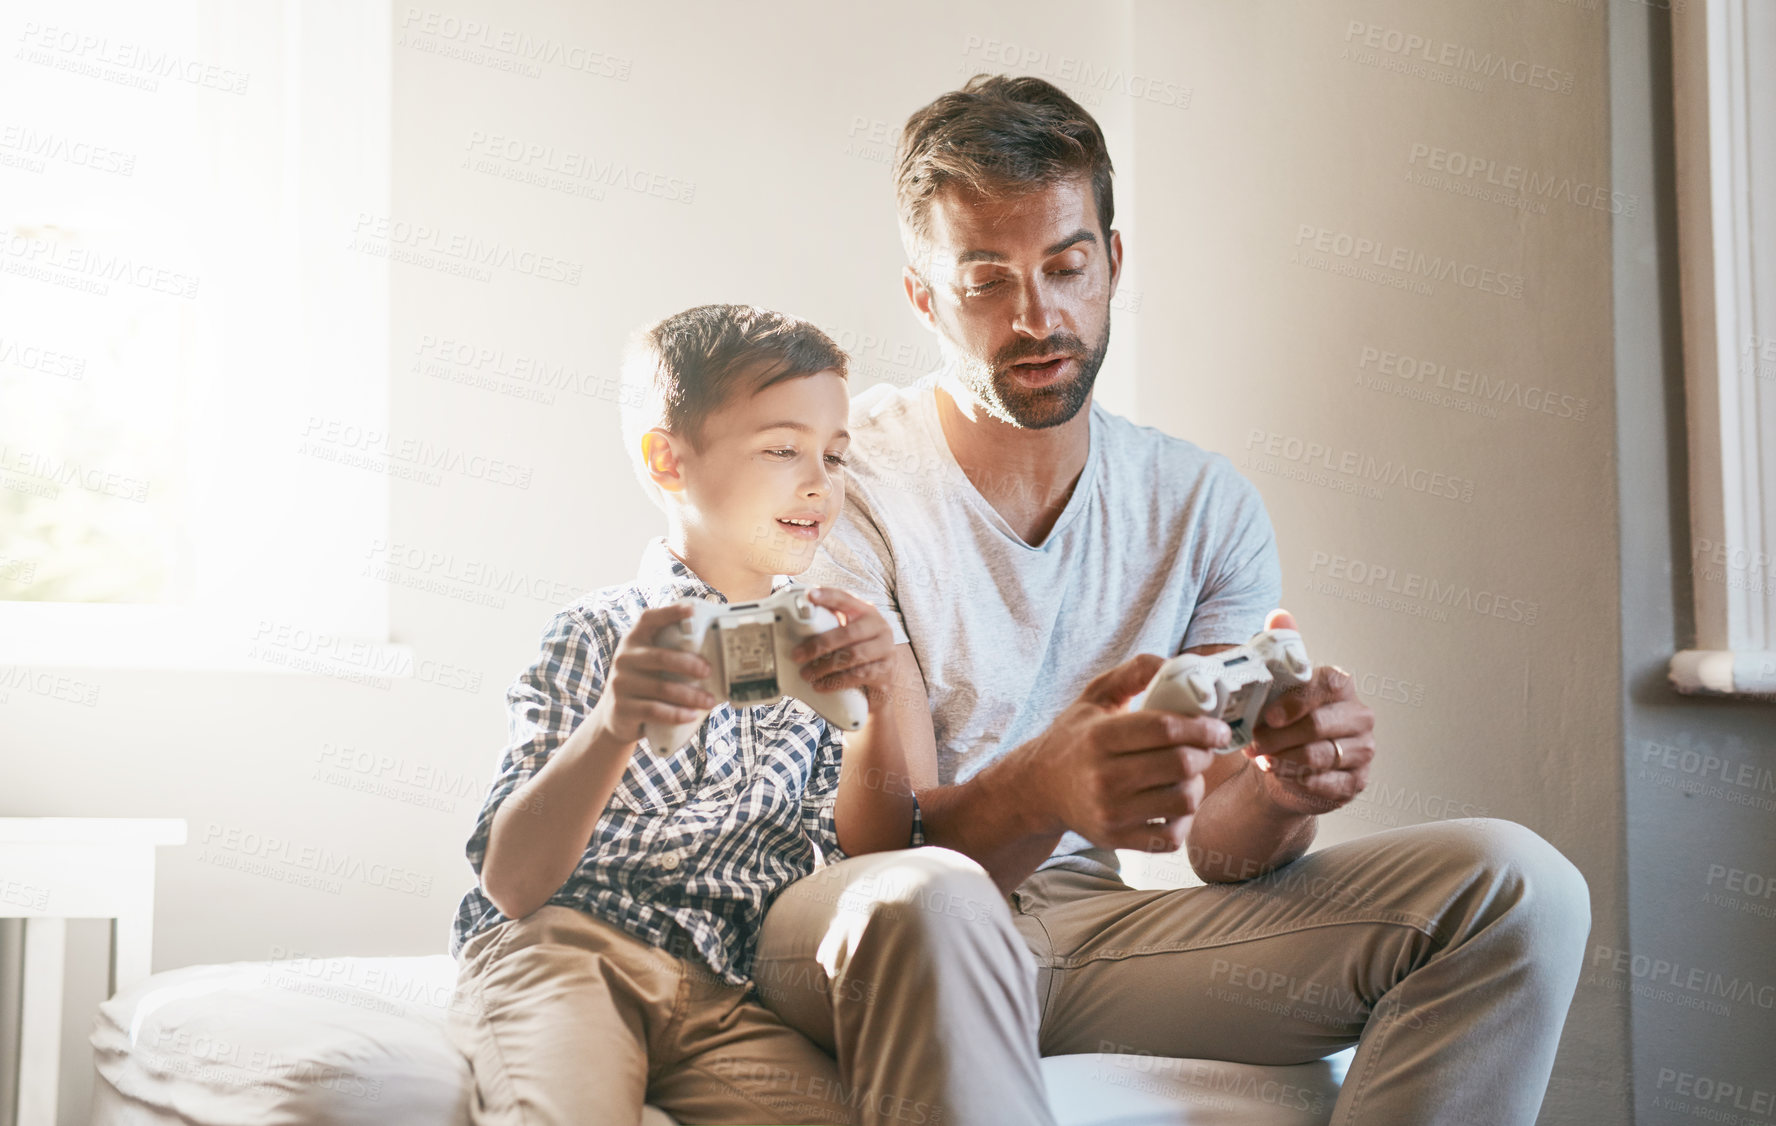 Buy stock photo Cropped shot of a young boy and his father playing video games